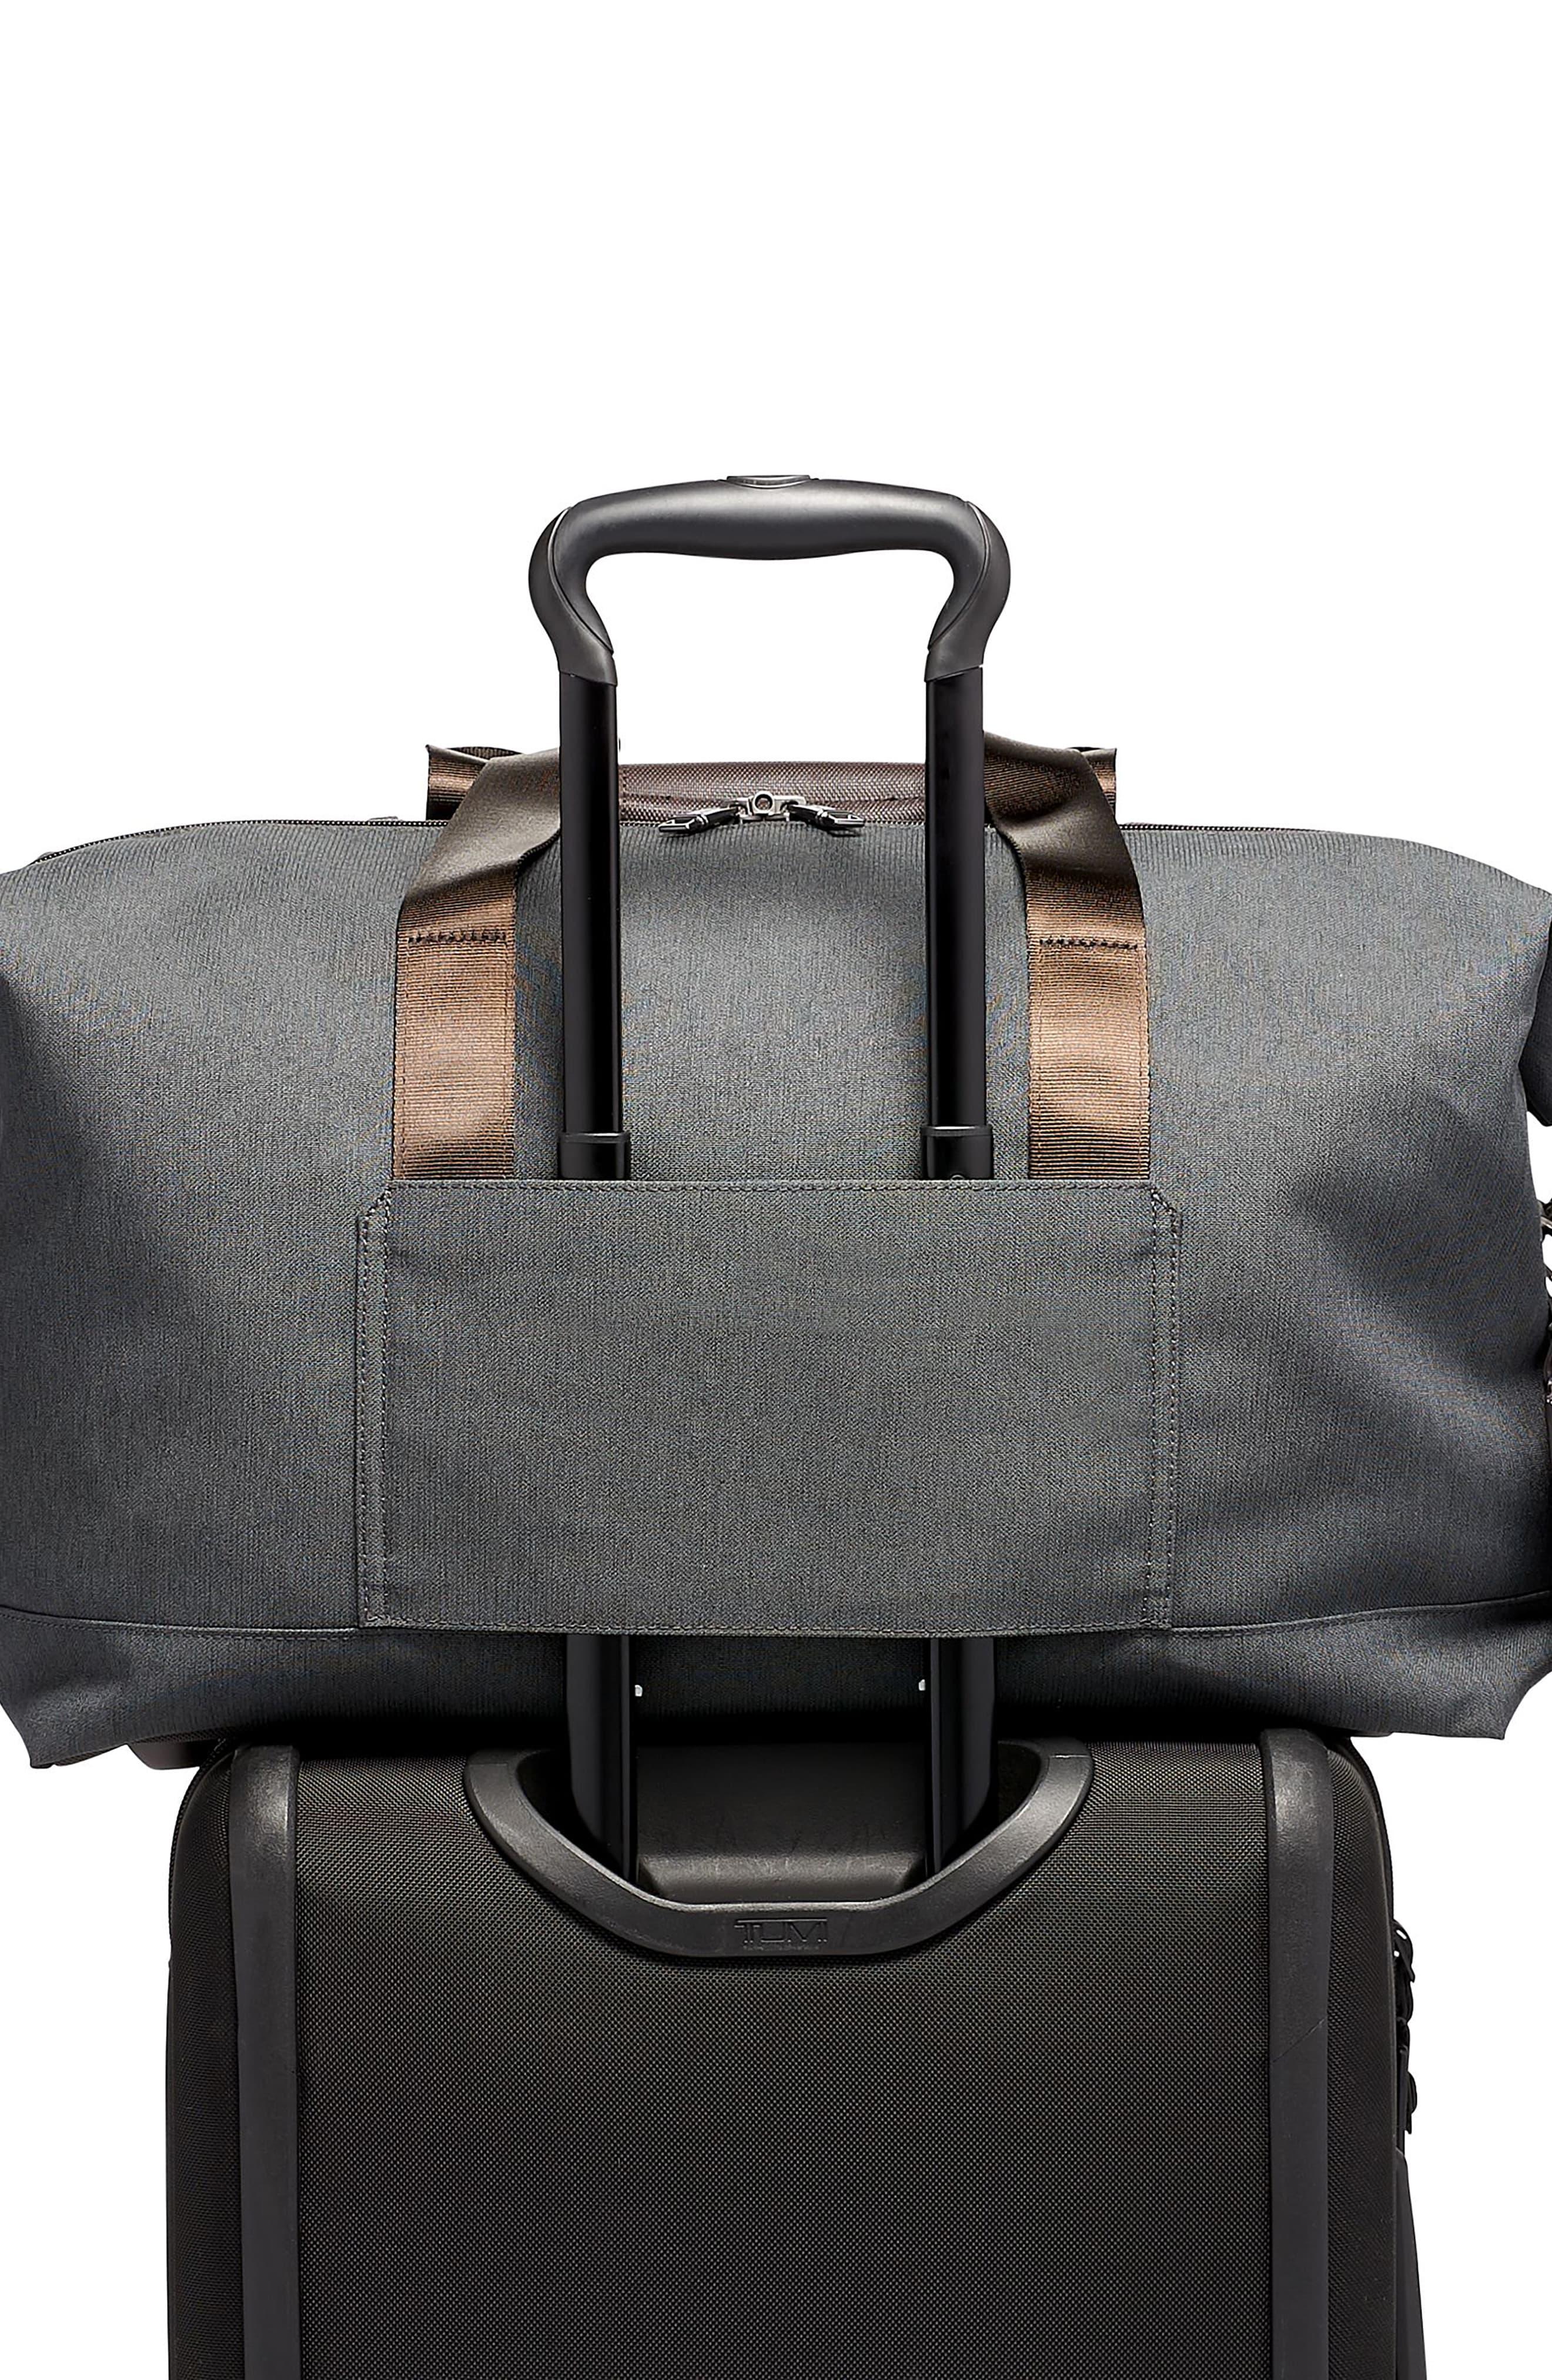 Tumi Alpha 3 Double Expansion Travel Satchel in Anthracite (Black) - Lyst